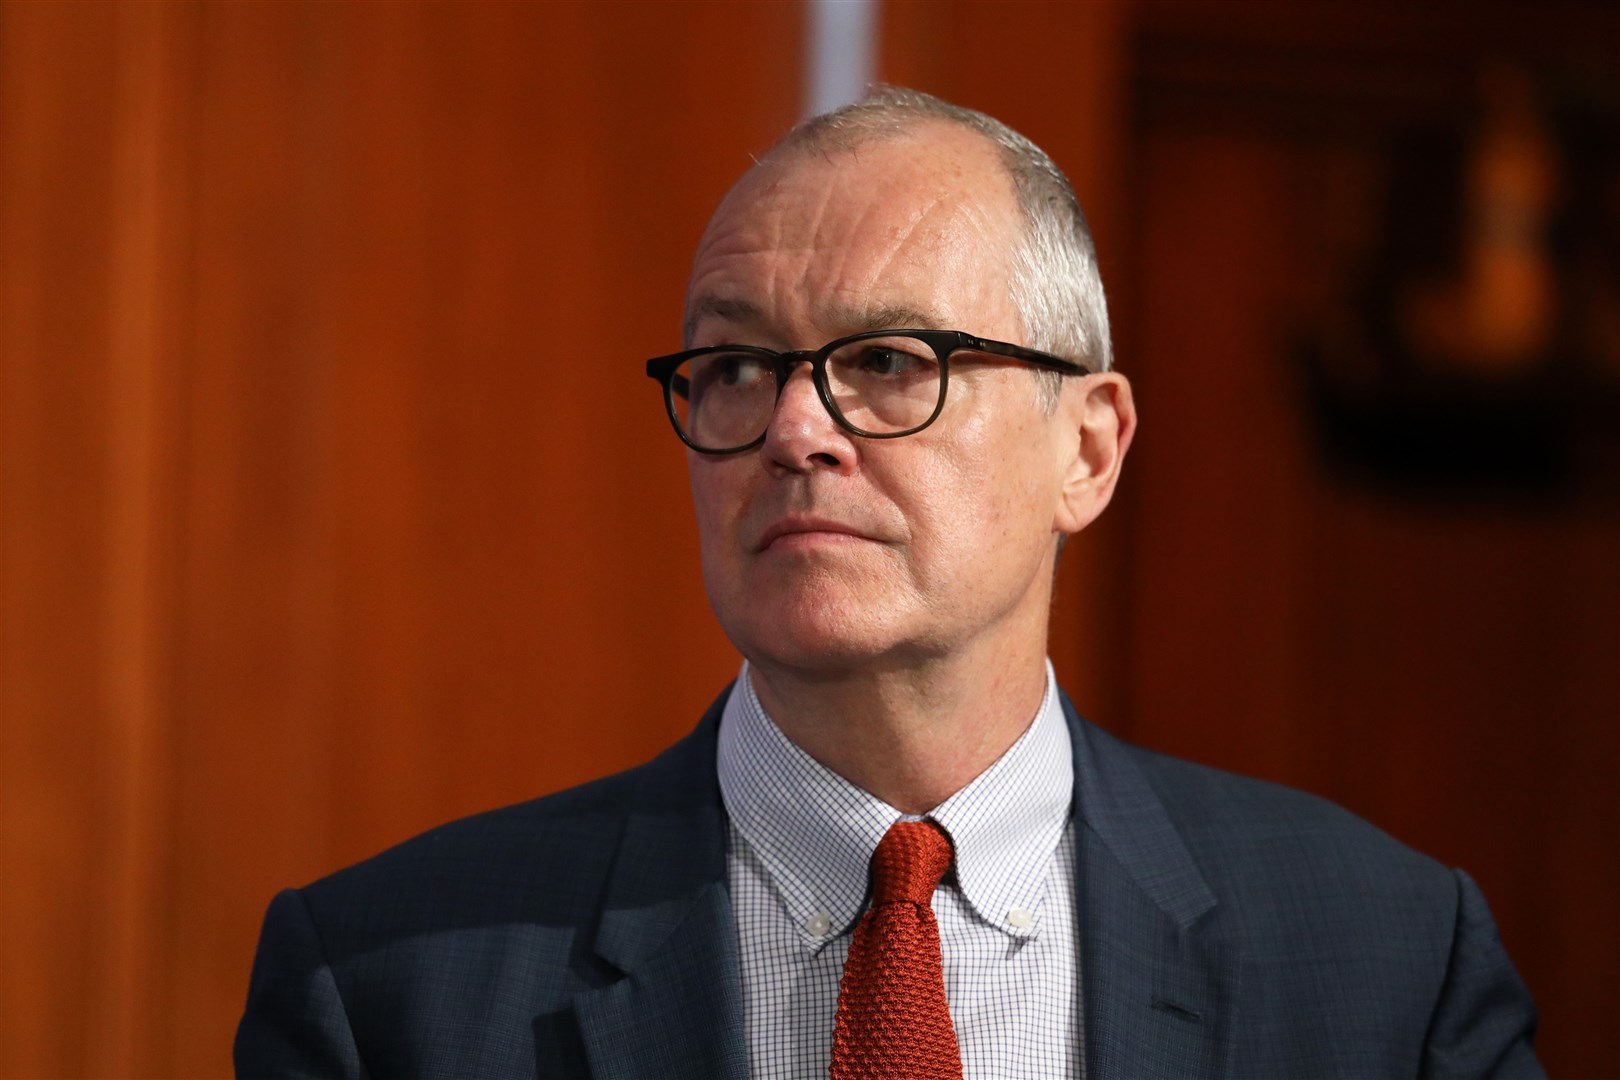 Lawyers for Sir Patrick Vallance say the inquiry’s use of the notes amounts to an interference in his right to private and family life (Dan Kitwood/PA)